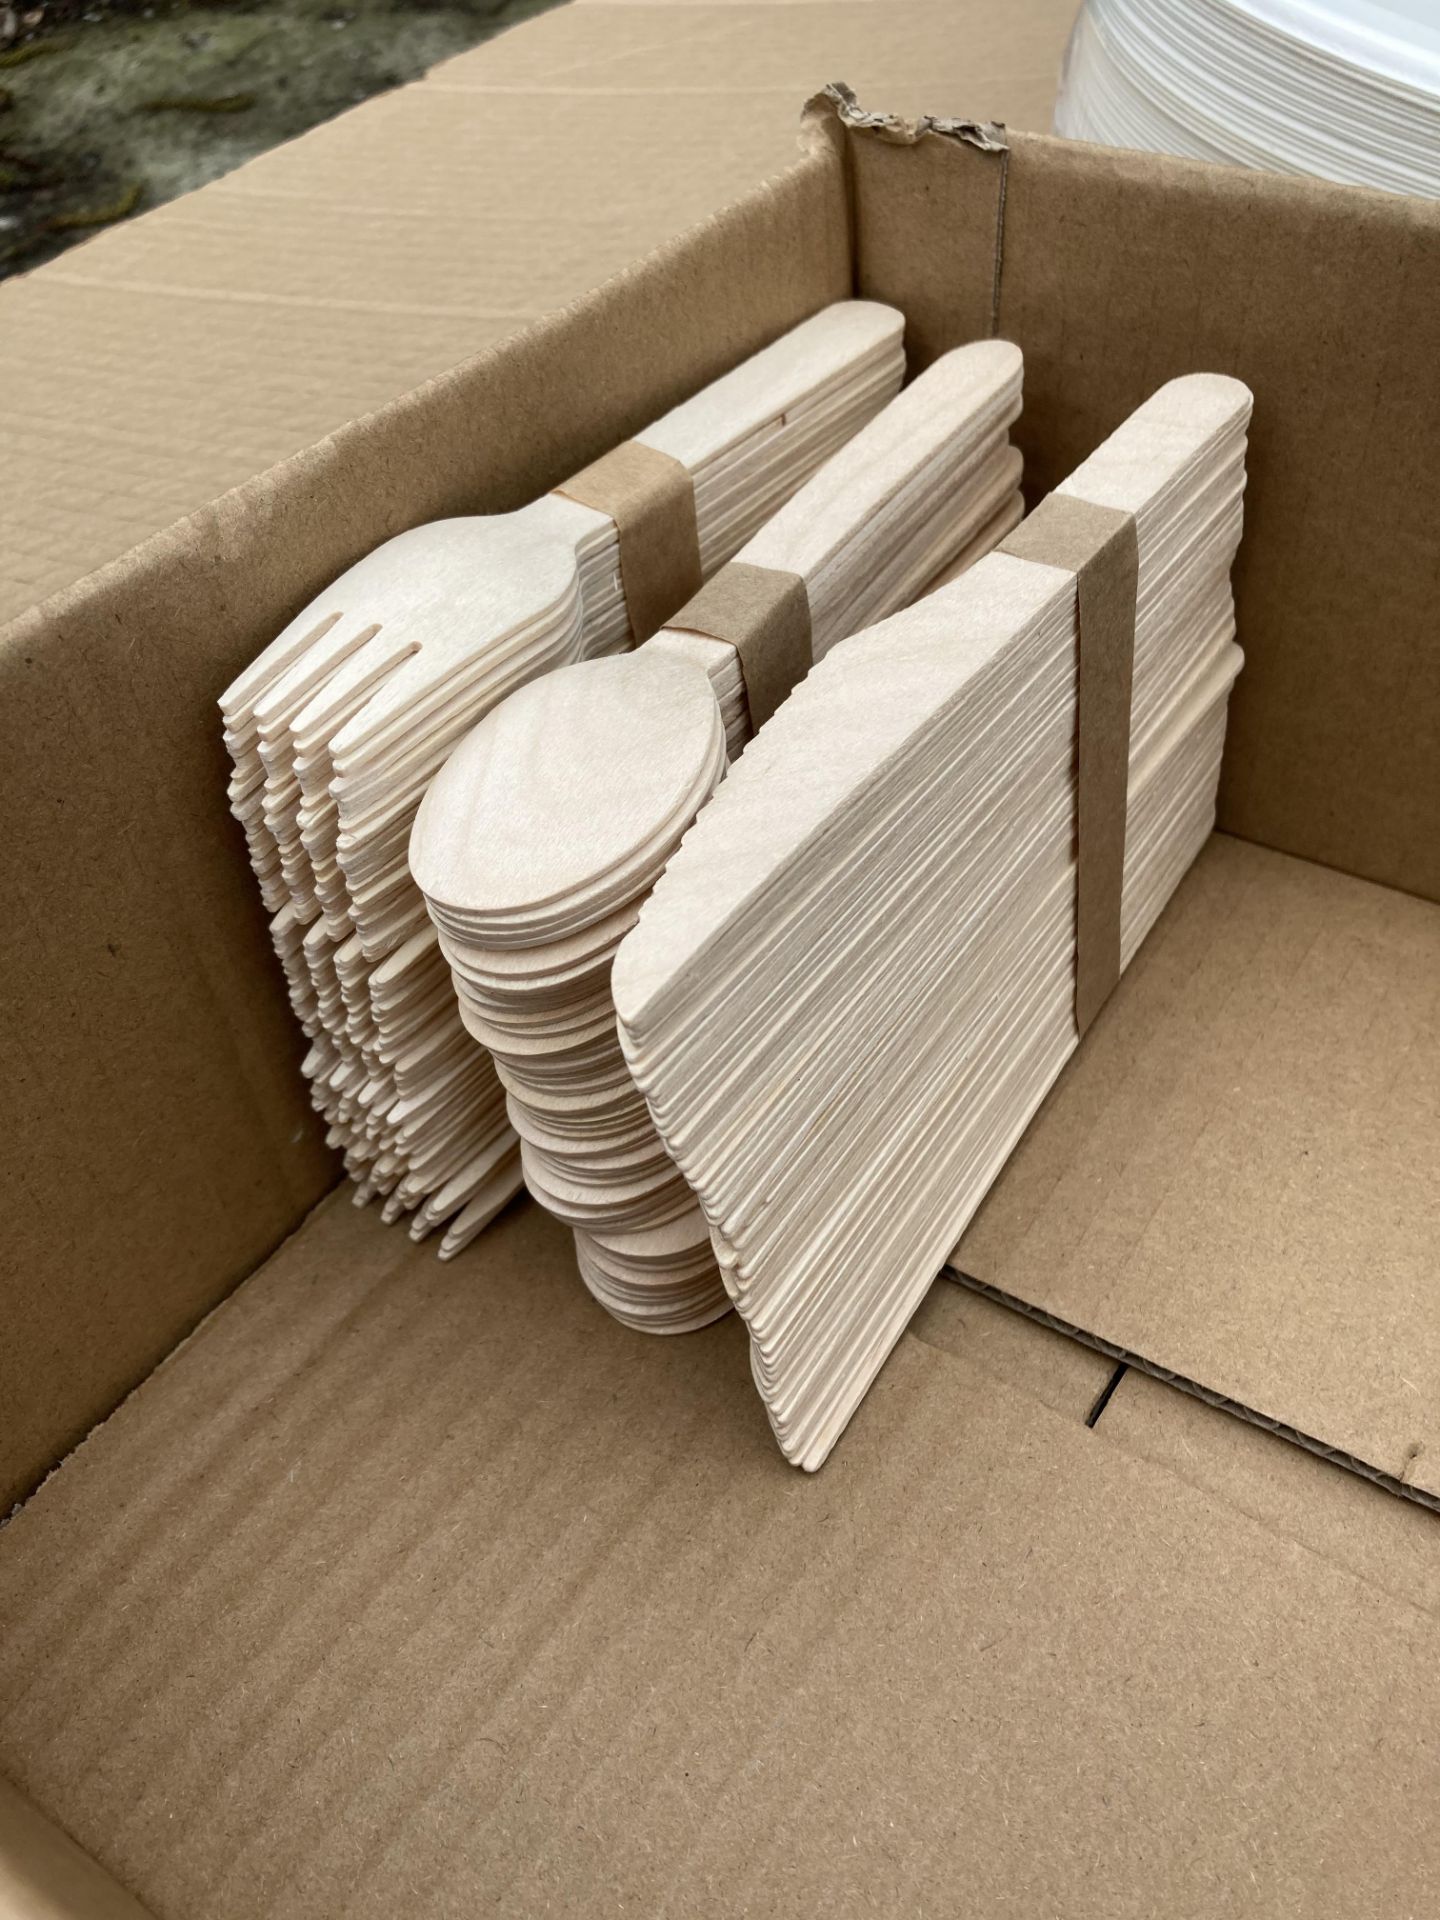 12 x Boxes of Wooden Cutlery and Paper Plates (1 x outer box) (saleroom location: Container 9) - Image 2 of 3